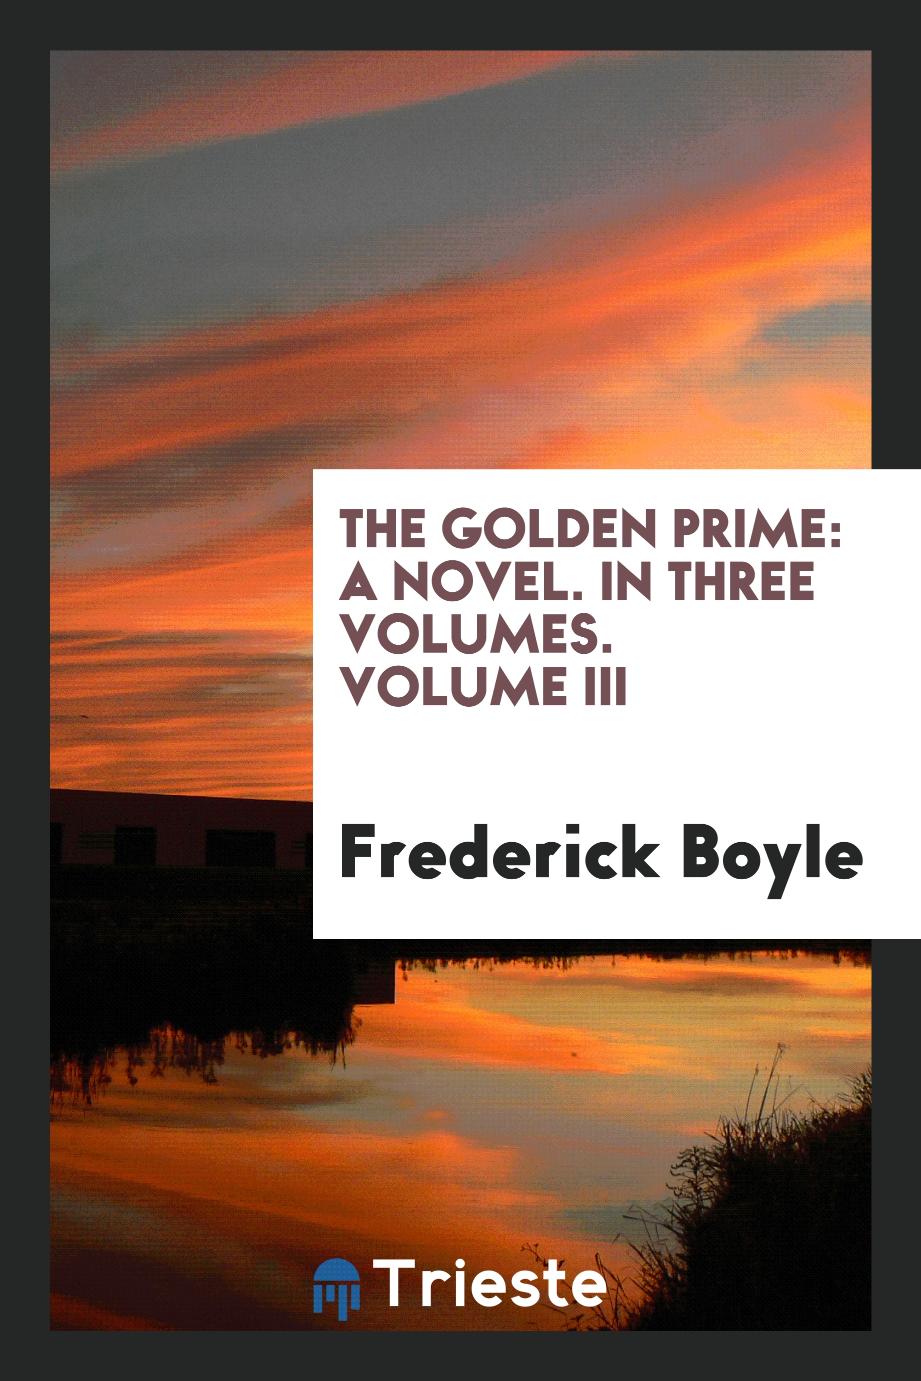 The golden prime: a novel. In three volumes. Volume III